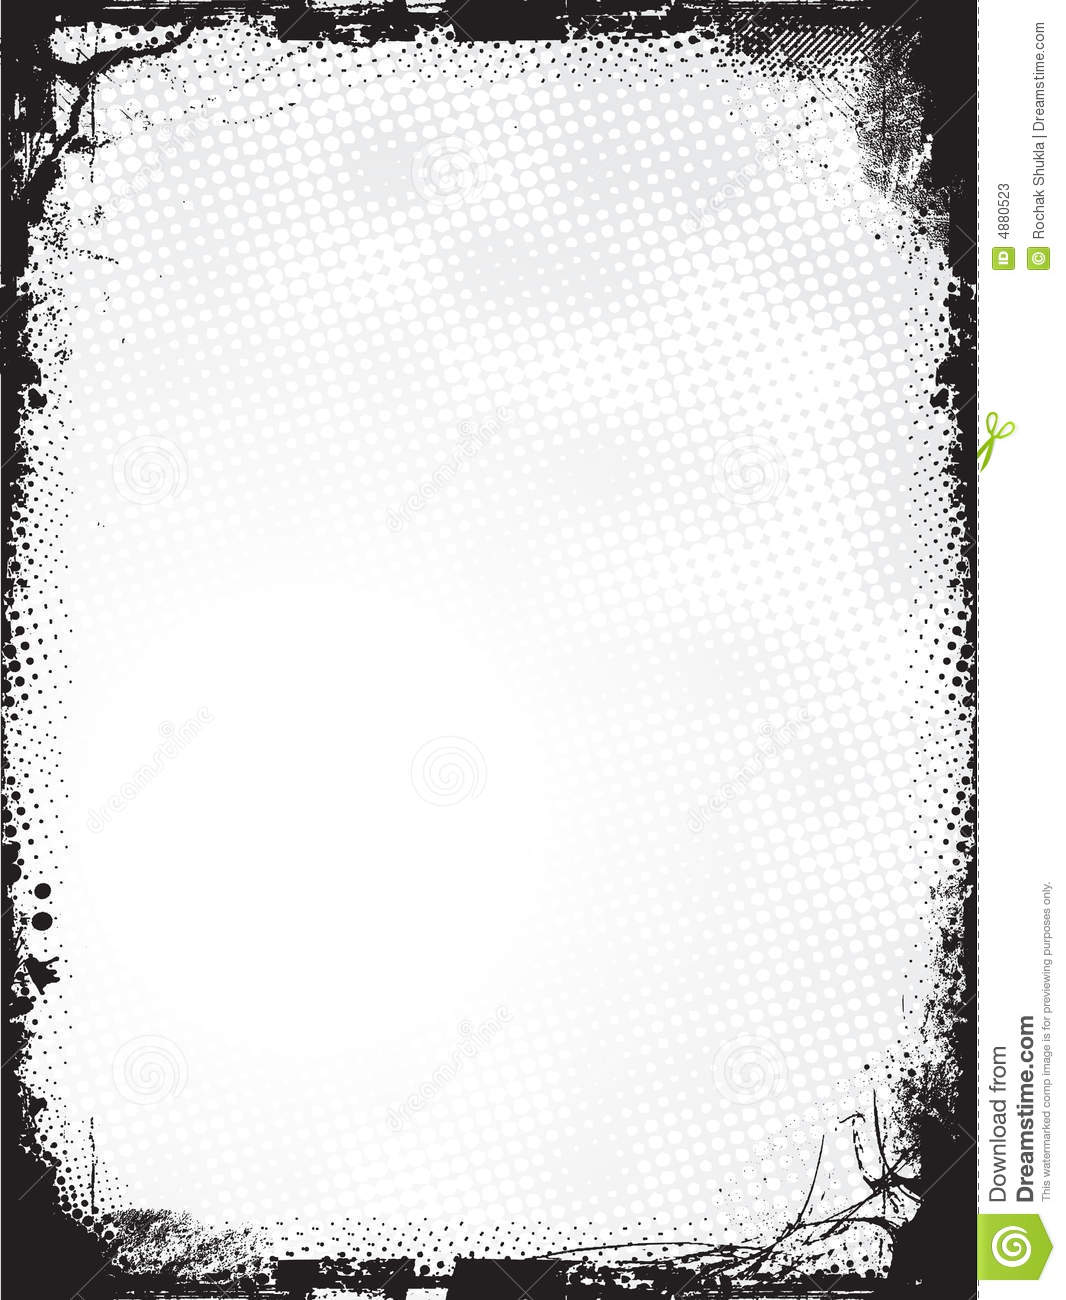 5 Grunge Frame Vector Images Free Vector Borders And Frames Rustic